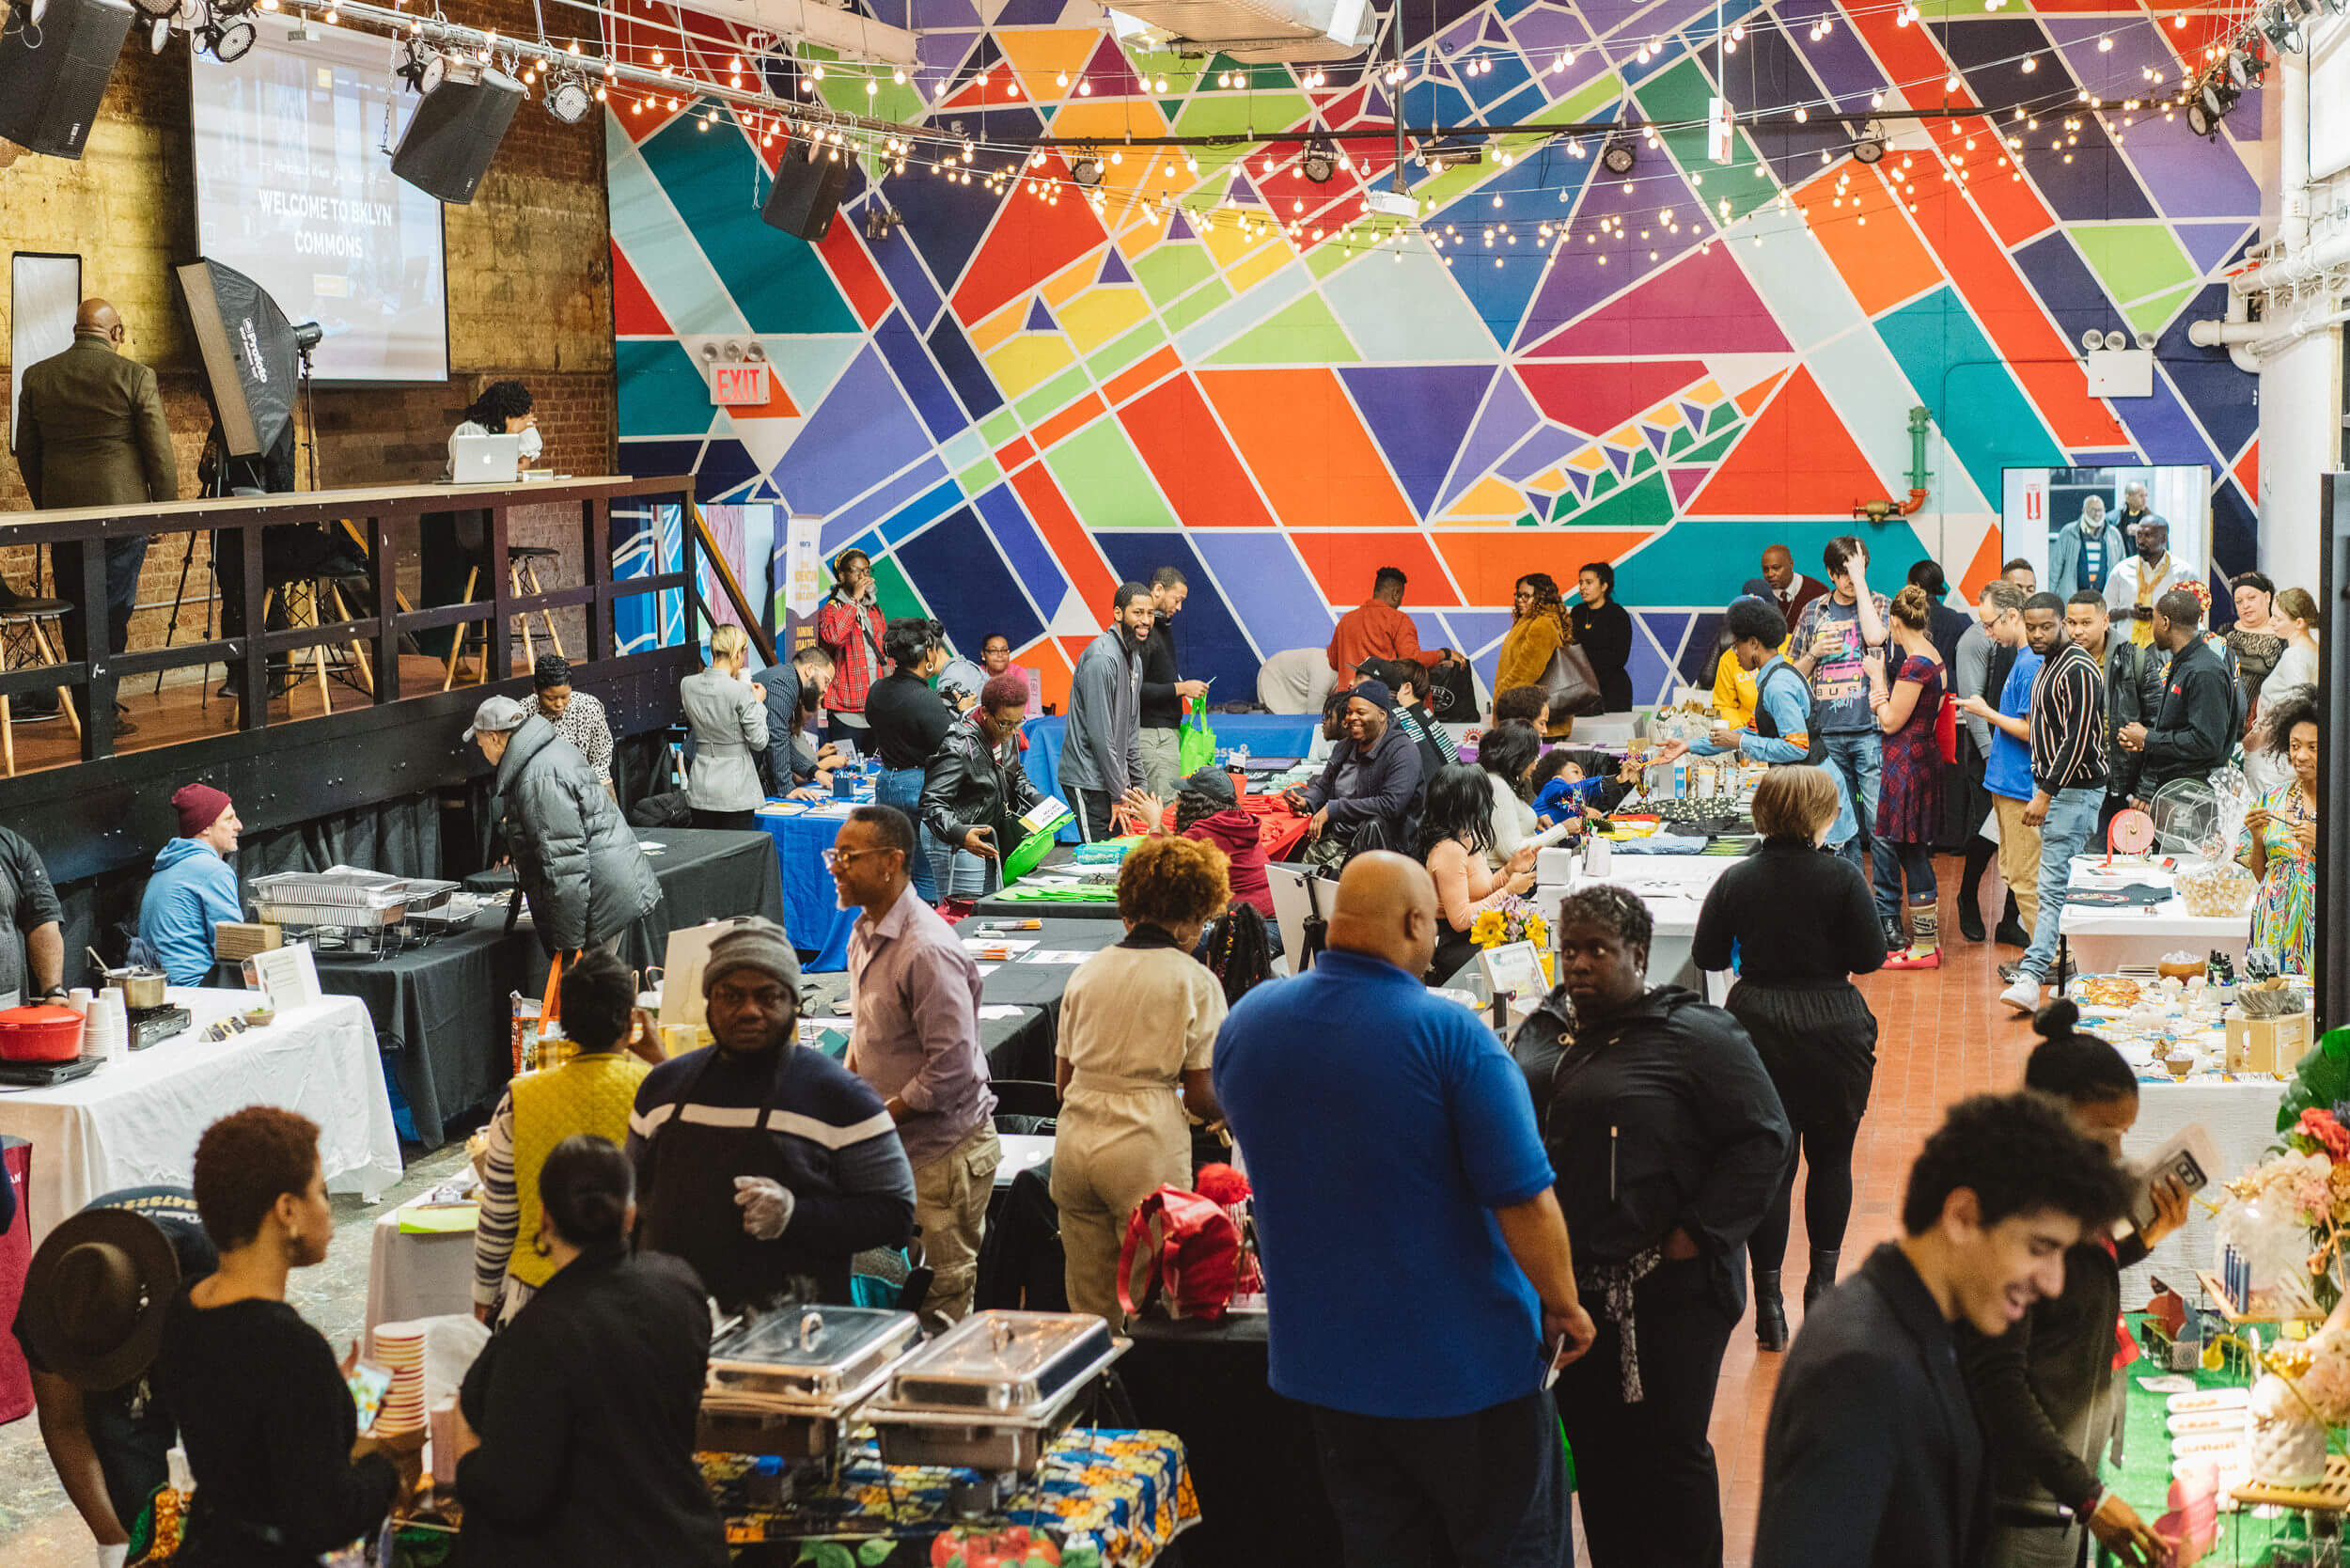 bklyn-commons-6th-annual-small-business-open-desk-pop-up-november-17